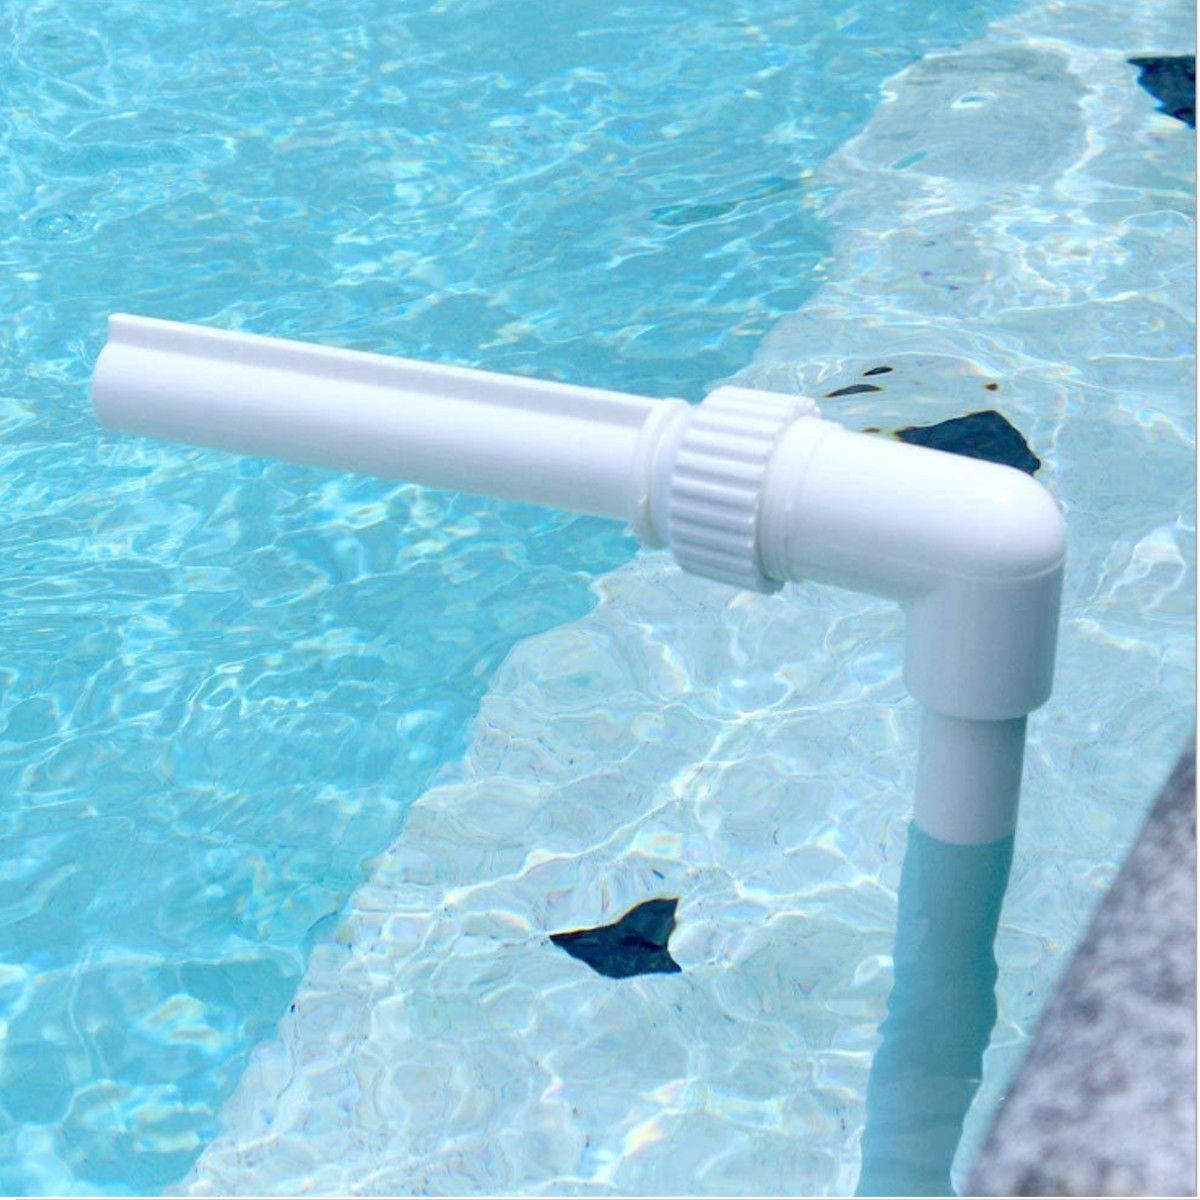 Adjustable-Swimming-Pool-Waterfall-Fountain-Summer-Water-Spay-Pool-Spa-Decor-1698810